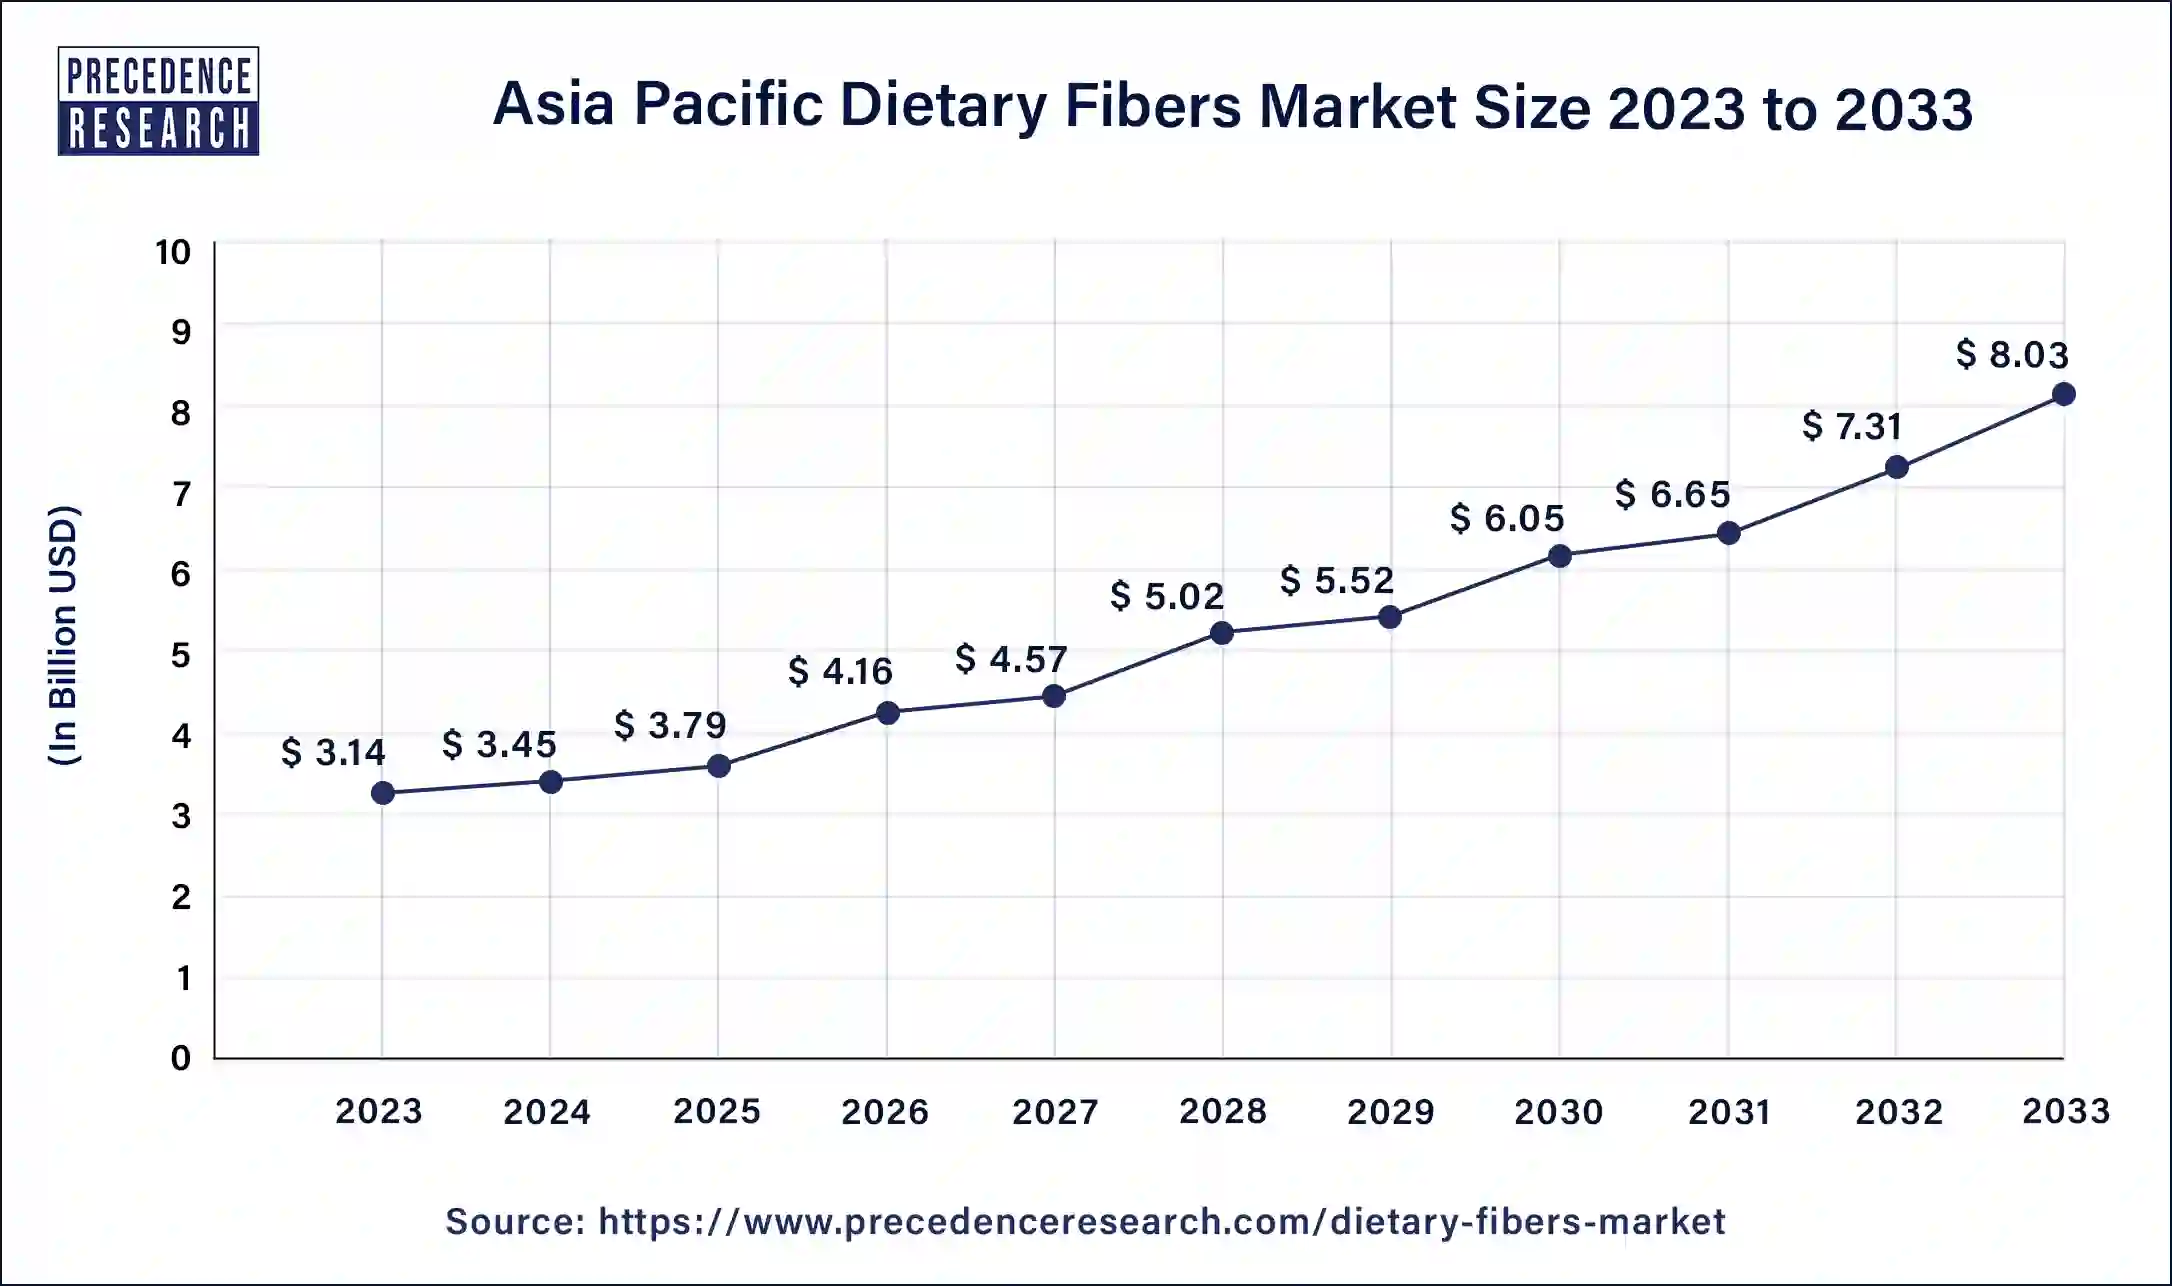 Asia Pacific Dietary Fibers Market Size 2024 to 2033